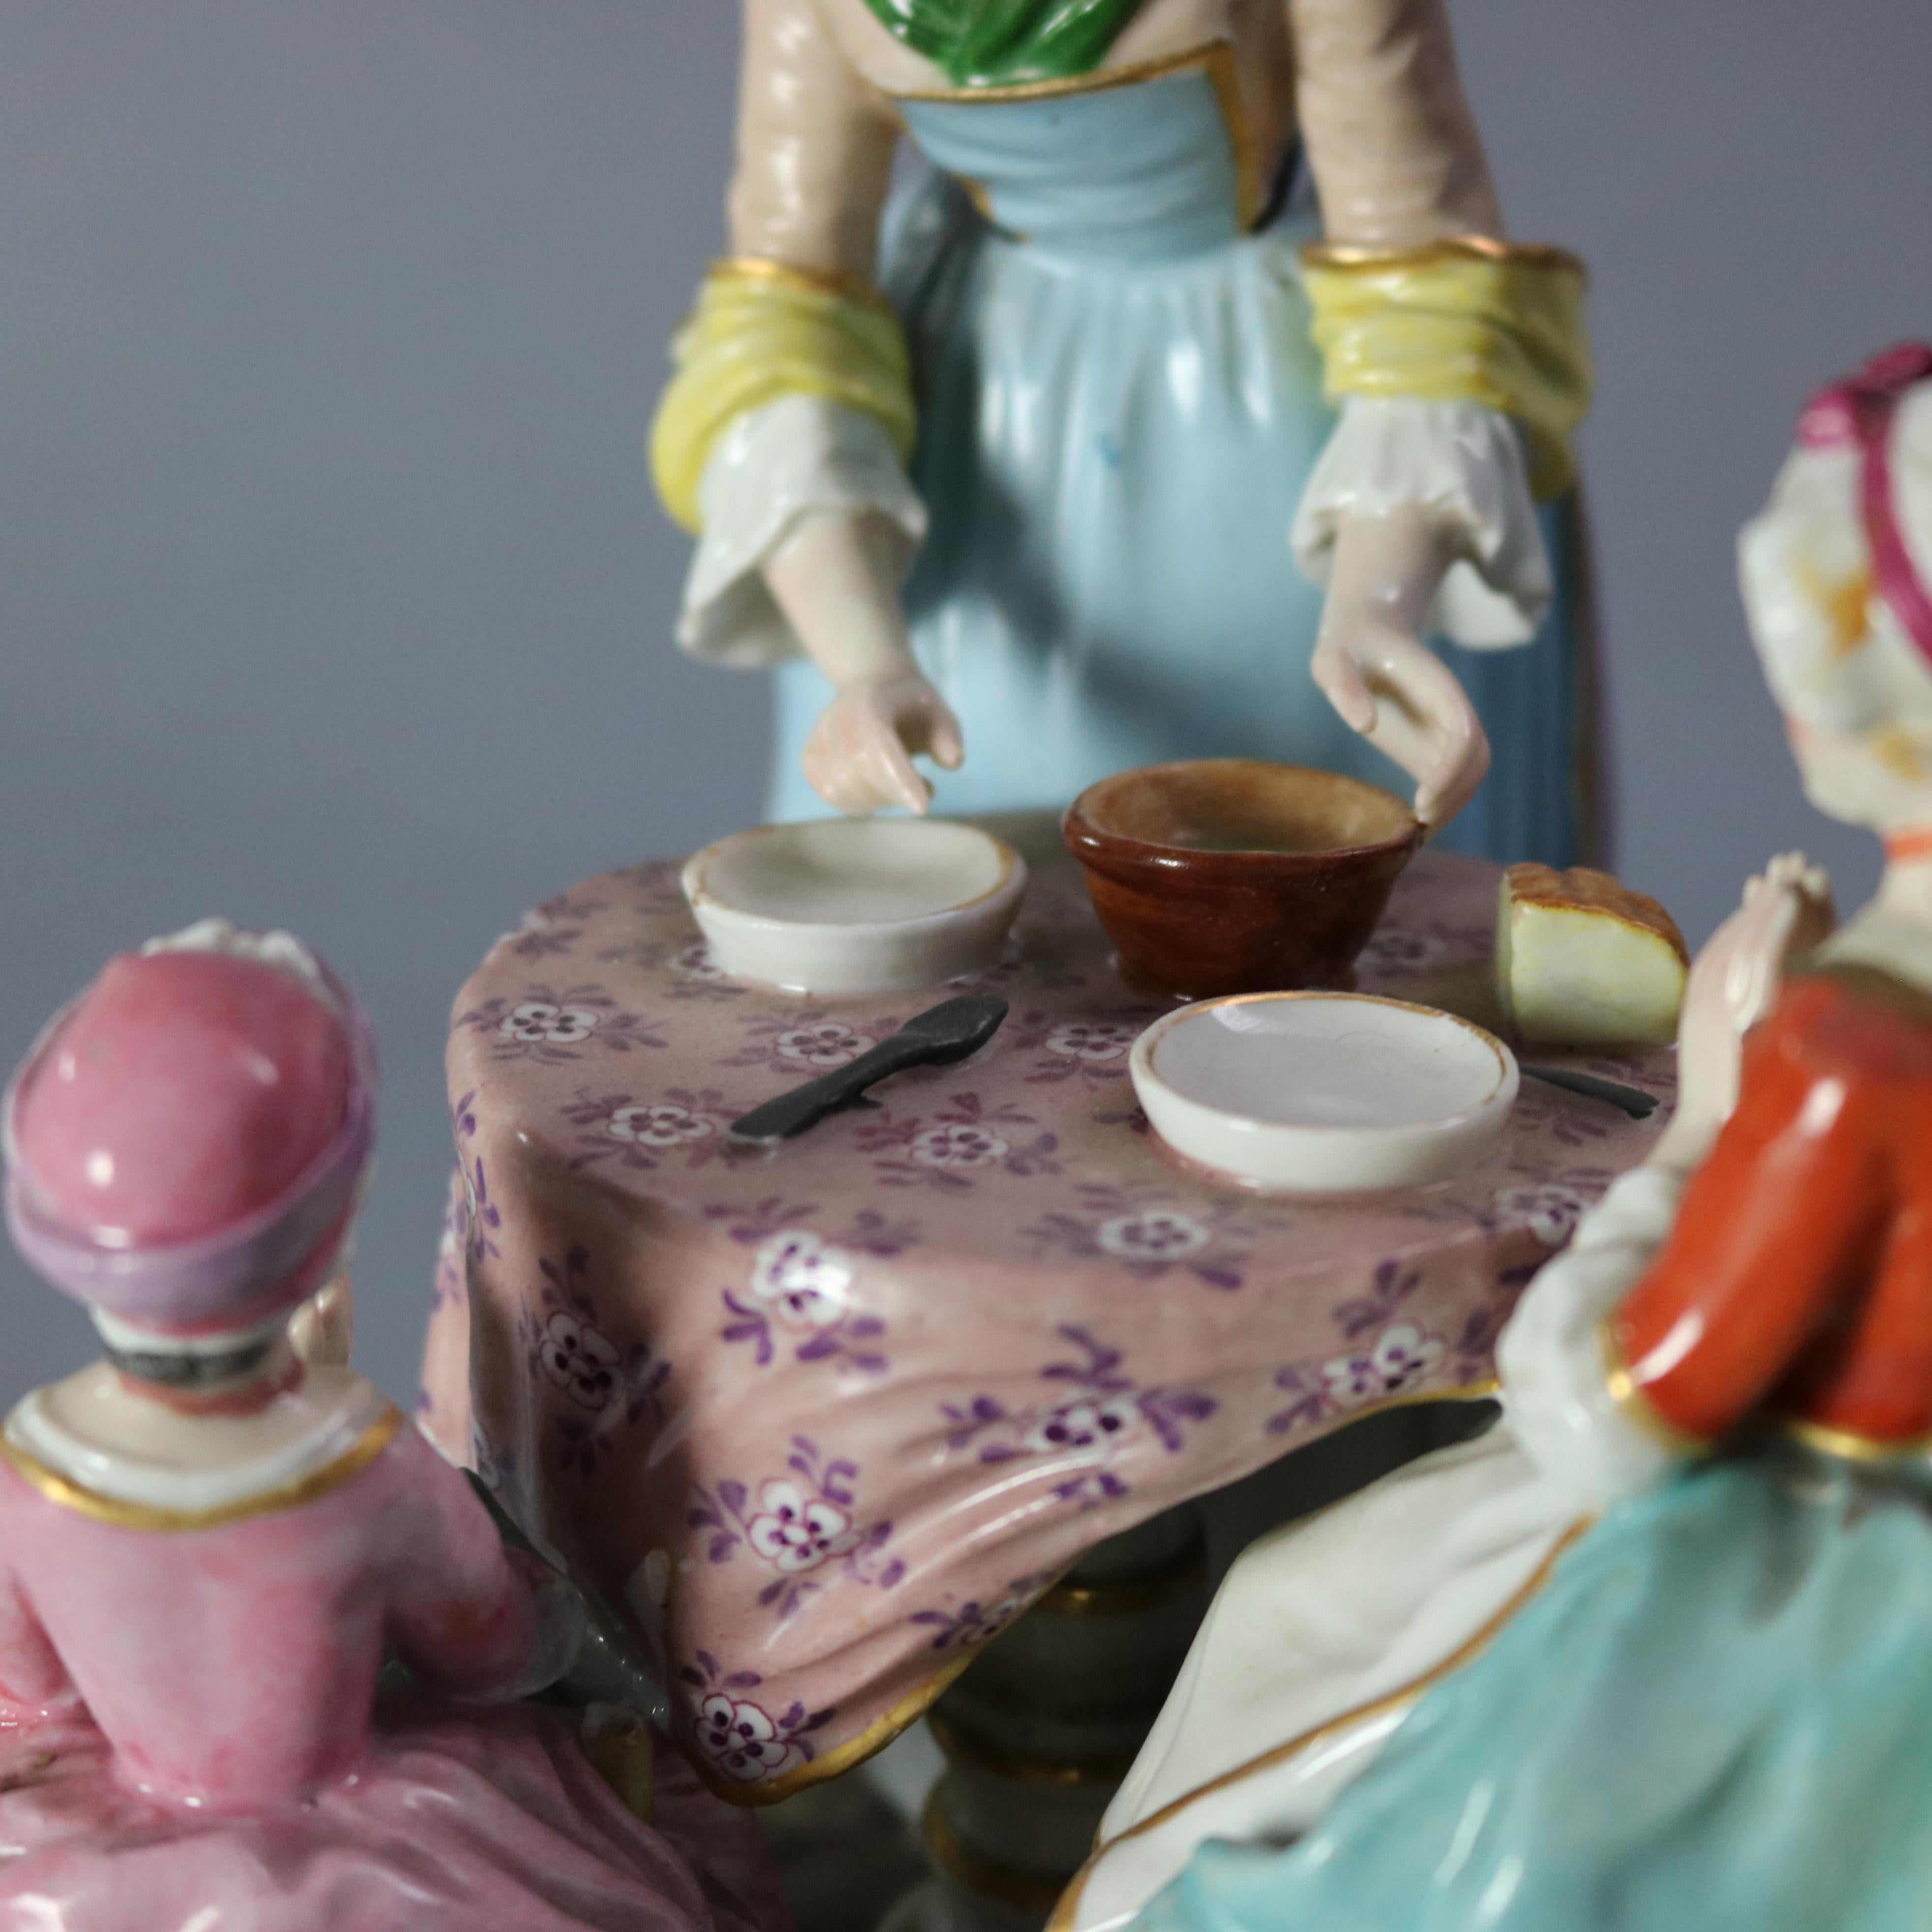 Fired Antique German Meissen Porcelain Figural Grouping, Le Benedictine, 19th Century